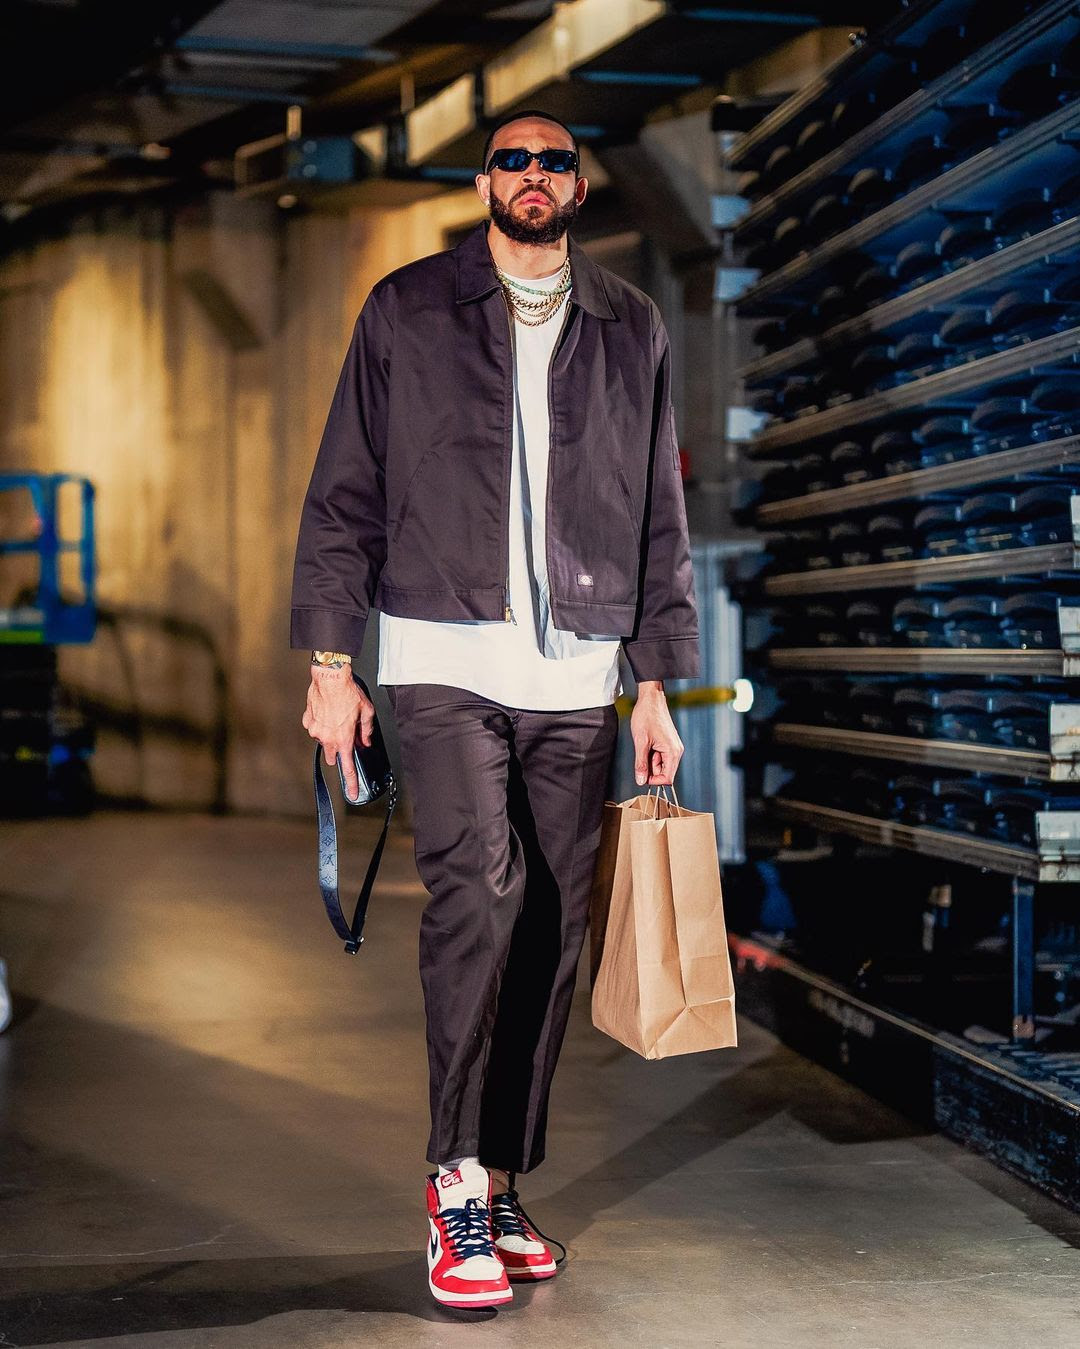 WHERE DO I COP? This Week’s Top NBA Fits from LeagueFits